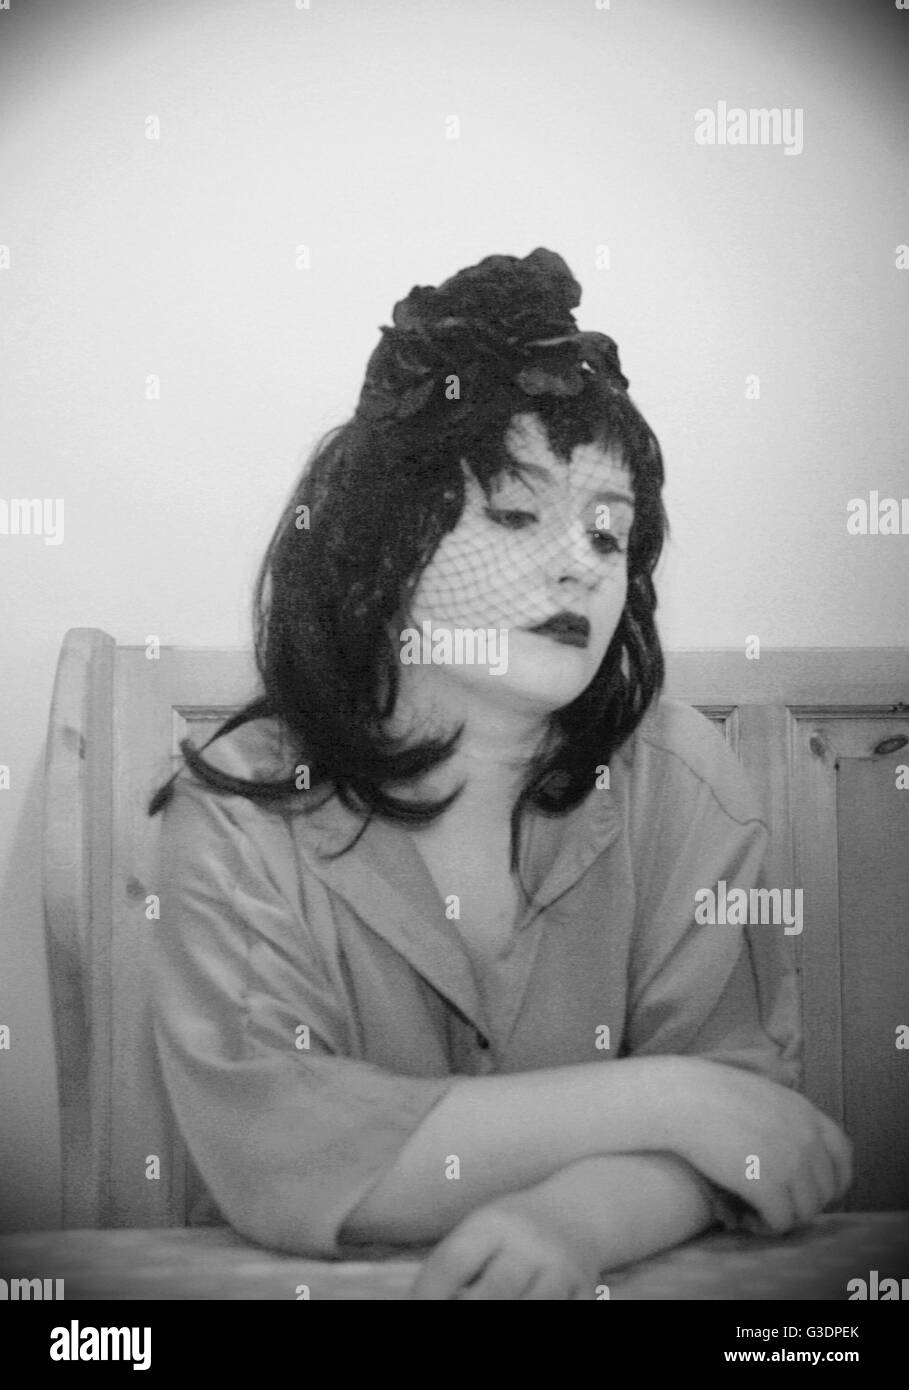 1970, 1960, 60s, 1970s woman, vintage portrait of a women, black and white photography, old fashioned, 70s fashion, old school Stock Photo